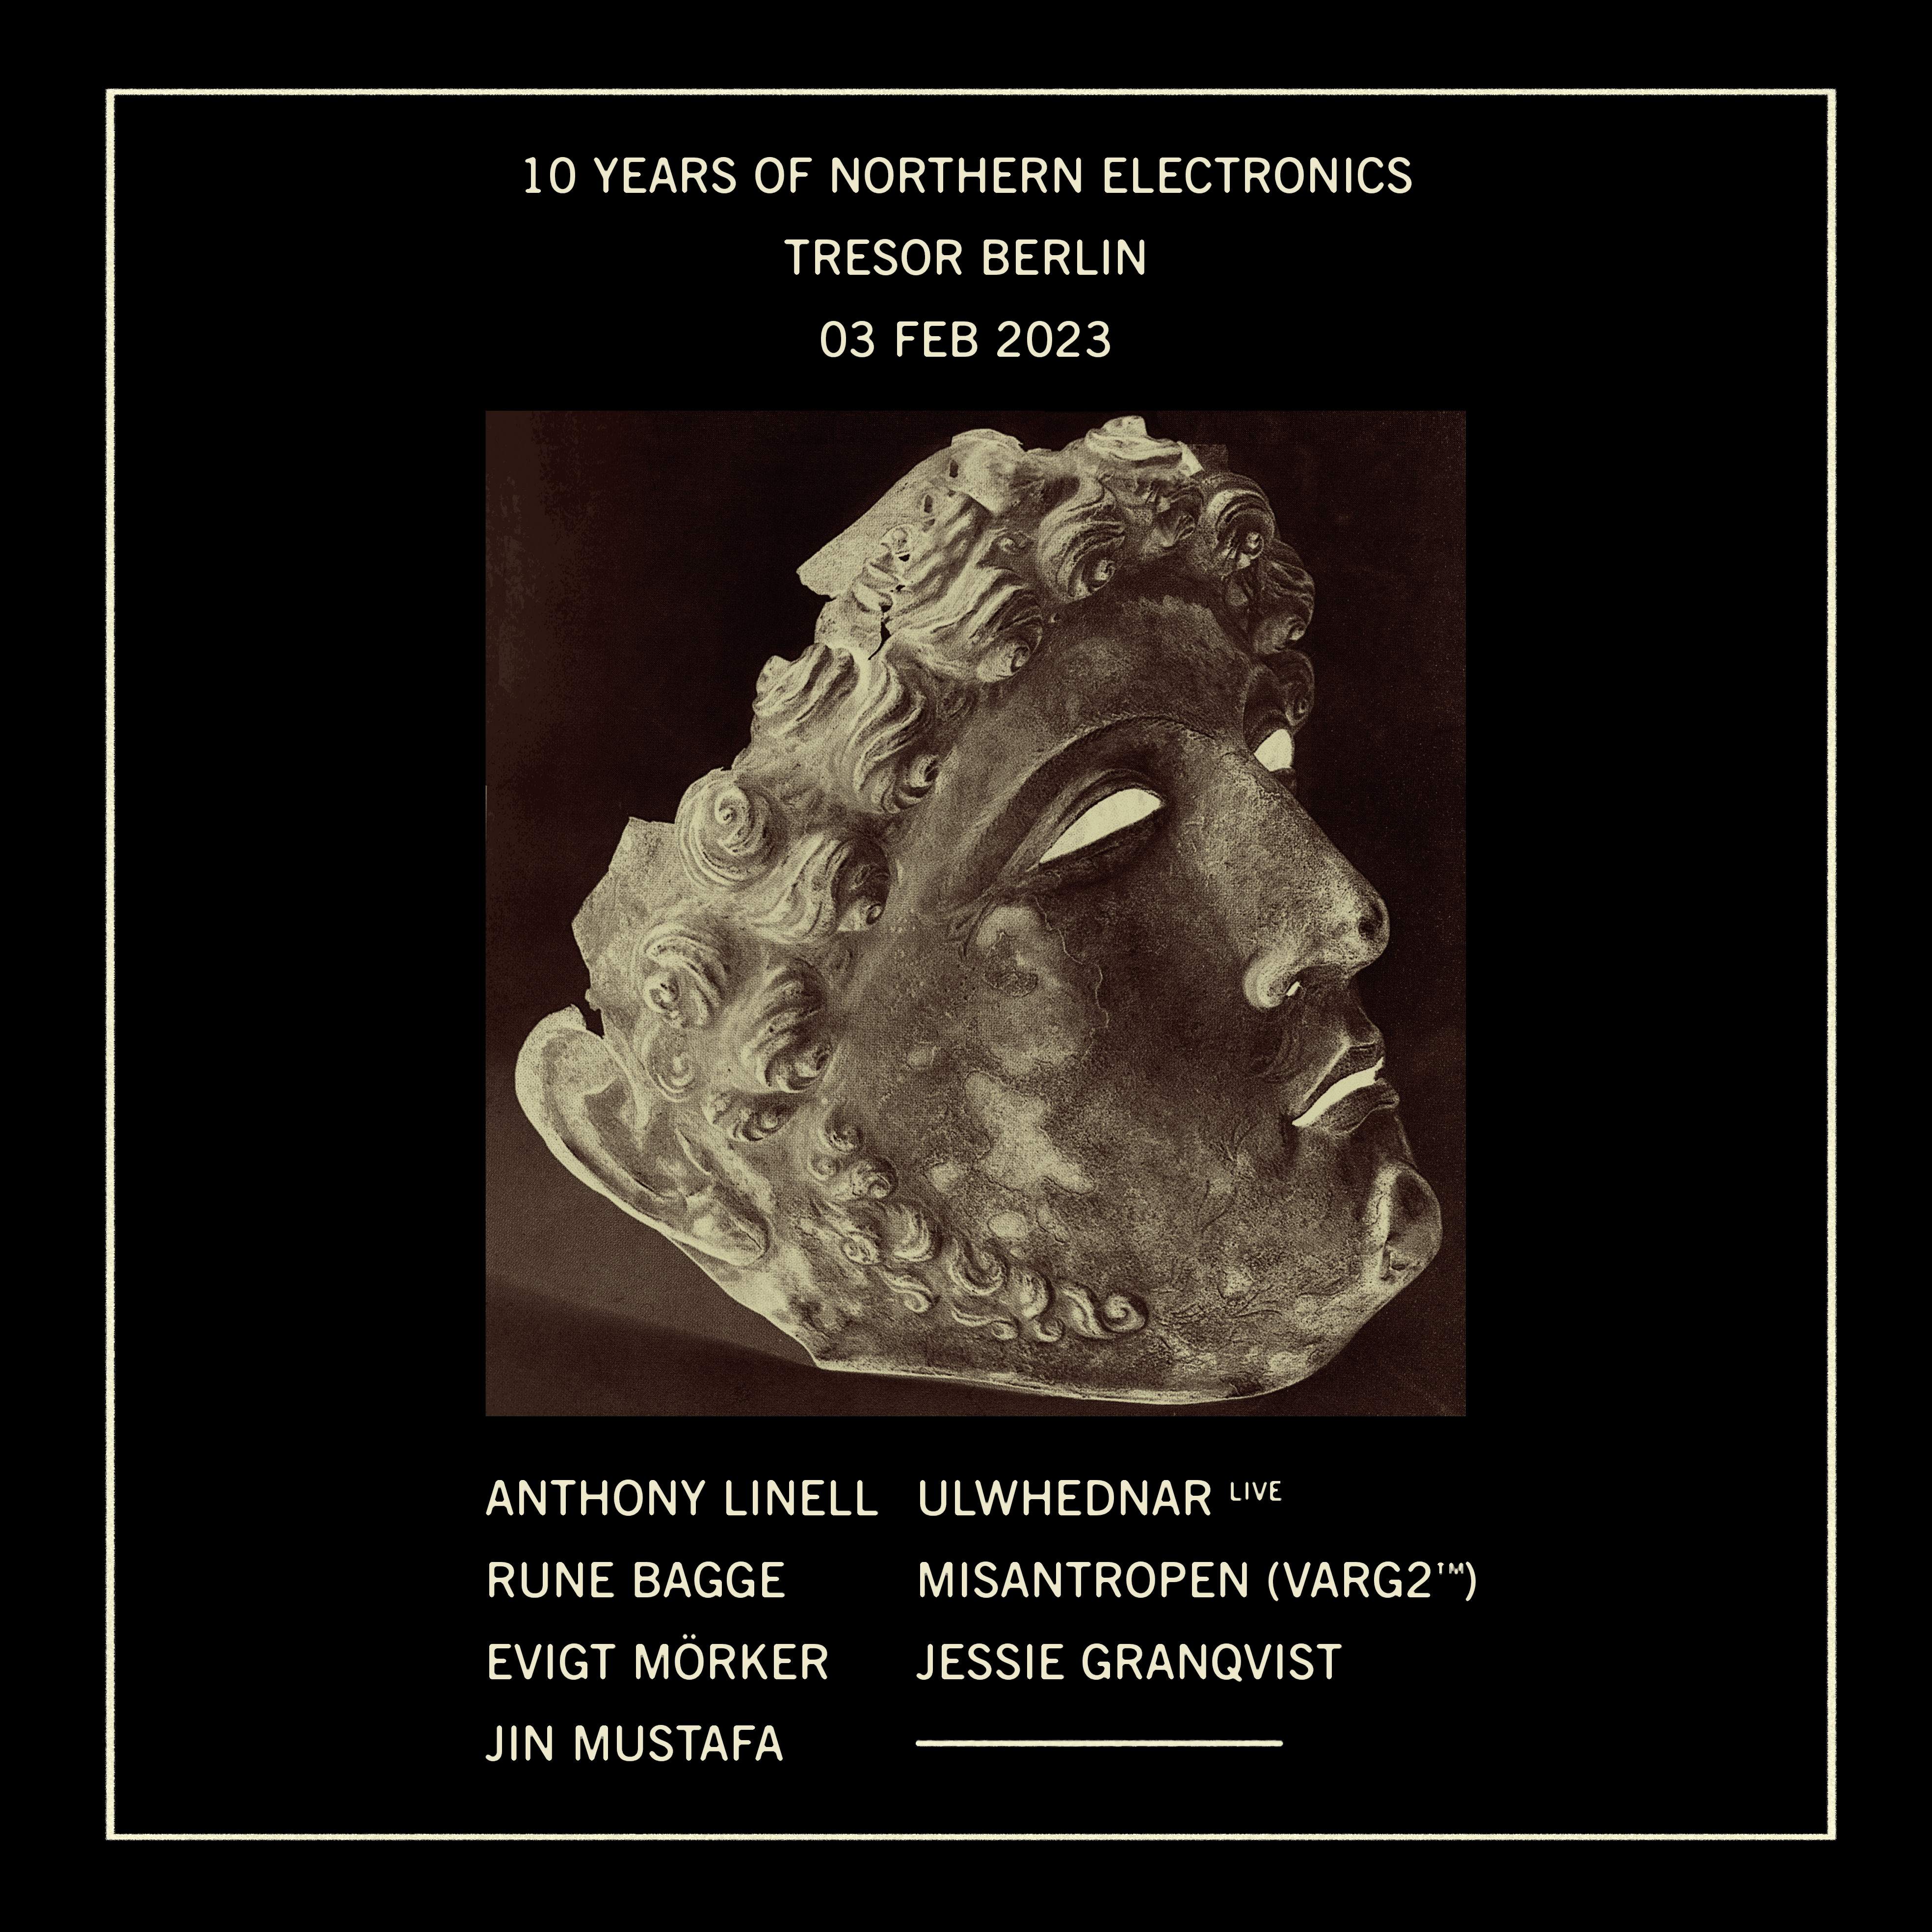 10 Years of Northern Electronics - Página frontal